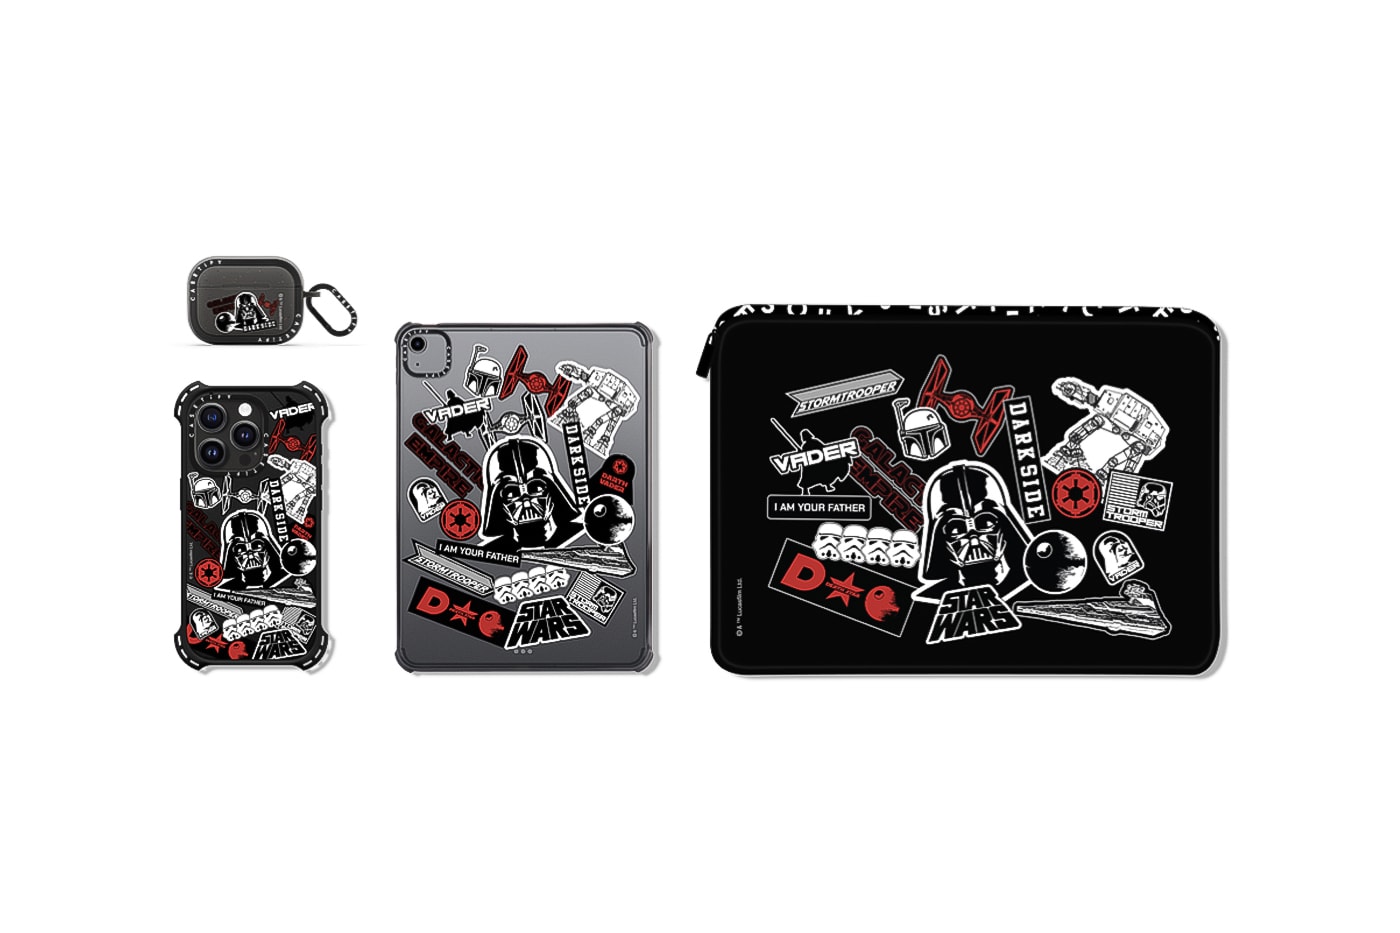 Star Wars CASETiFY May the Fourth 2024 collab collection Release Info